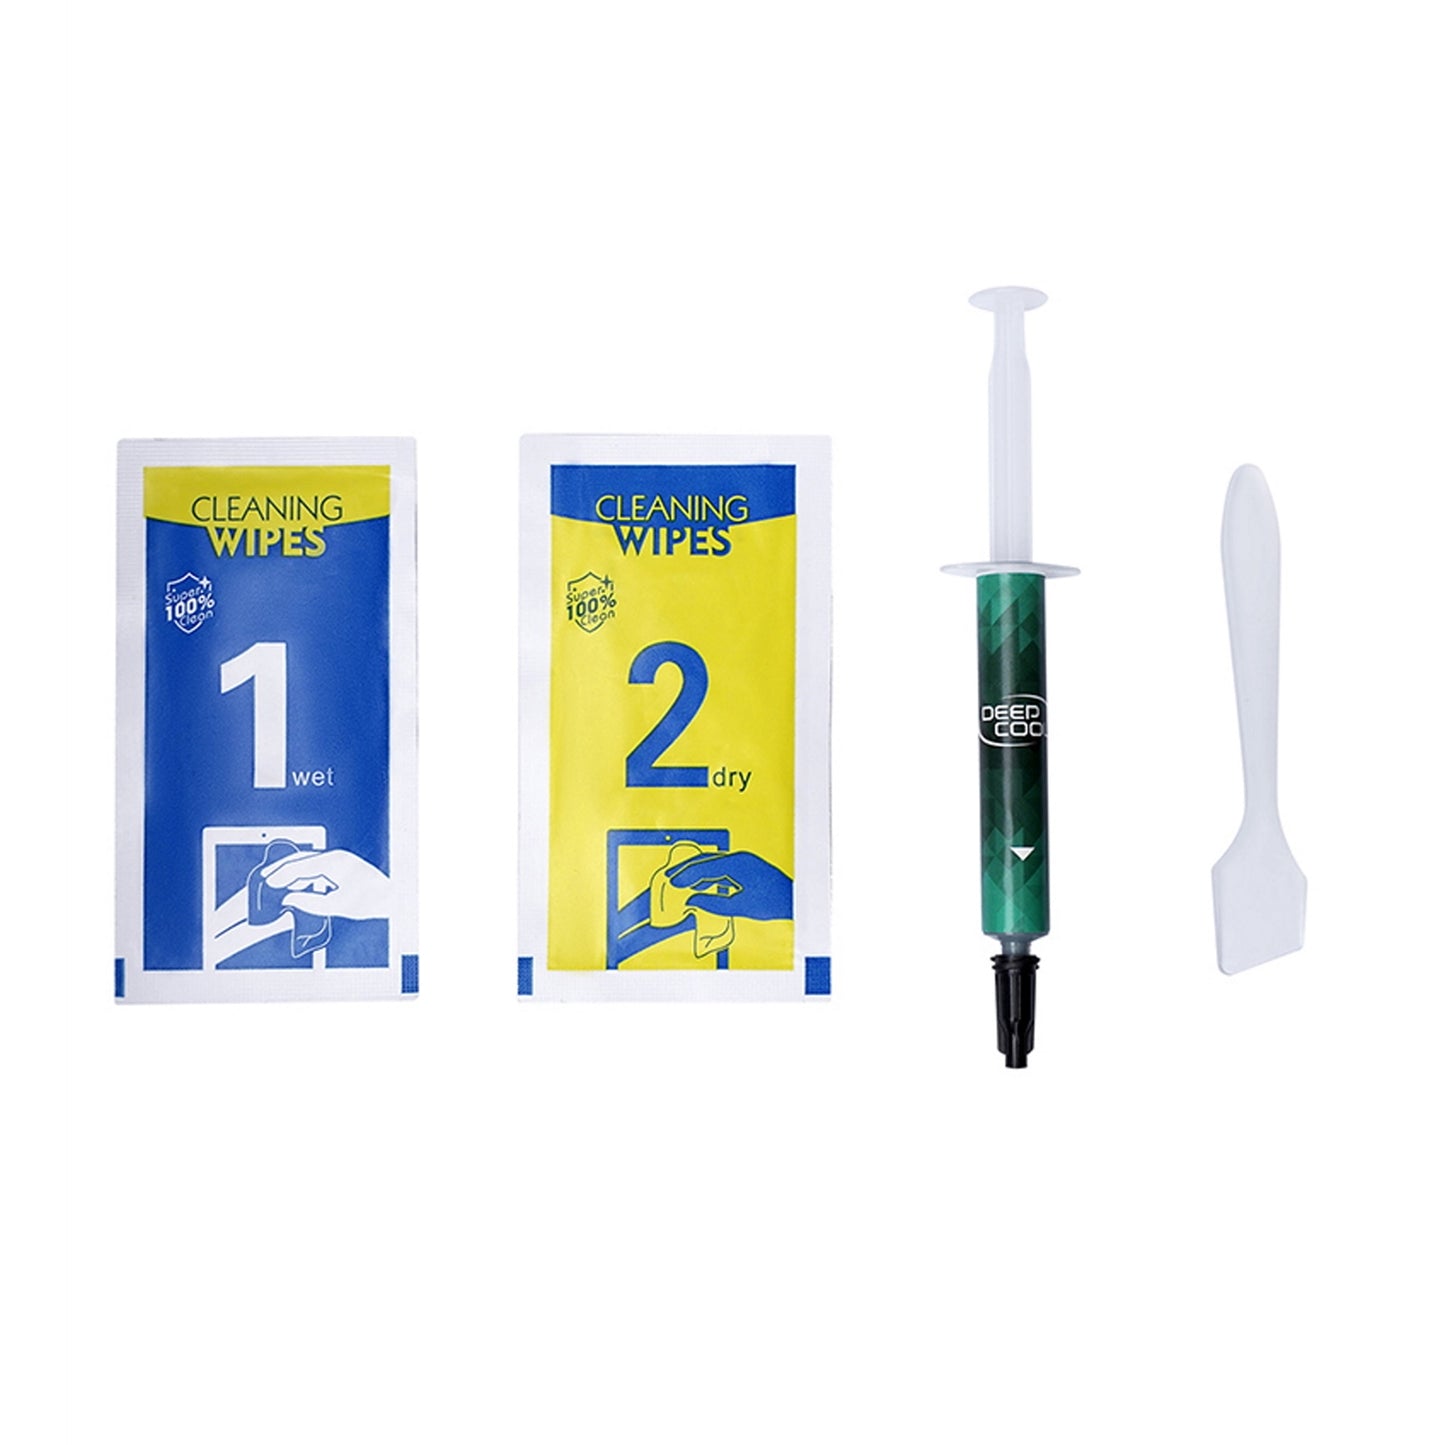 DeepCool Z10 5g Thermal Compound Syringe, Cobalt Blue, Industrial Grade Thermal Interface, High Thermal Conductivity